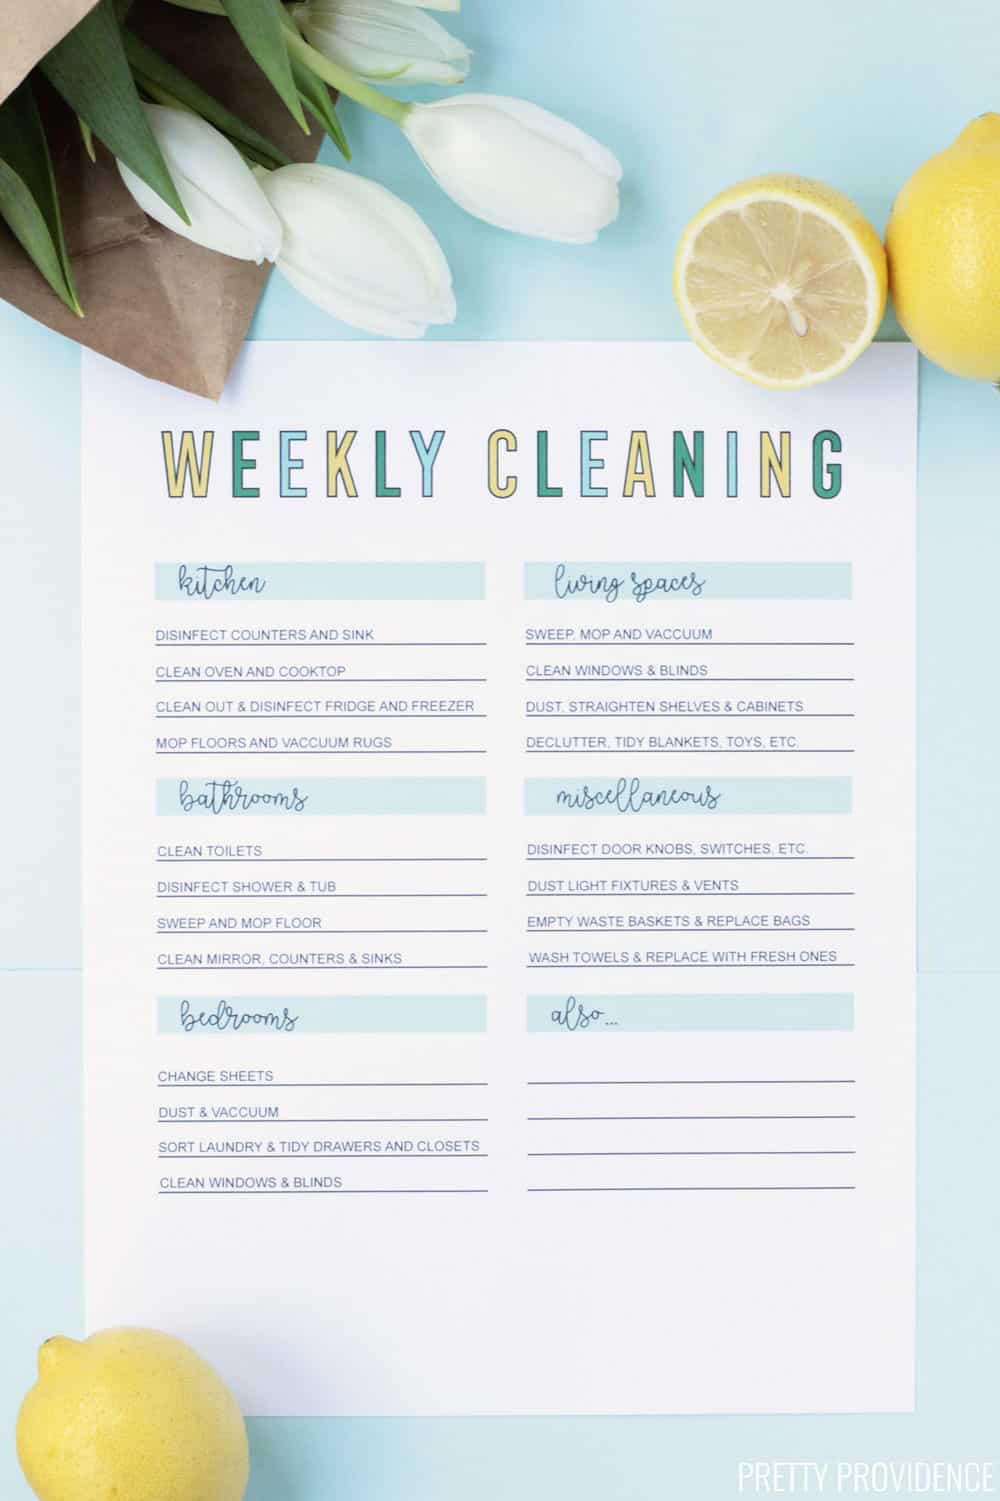 Weekly cleaning routine checklist, printed on white paper with lemon slices and tulips on the side!